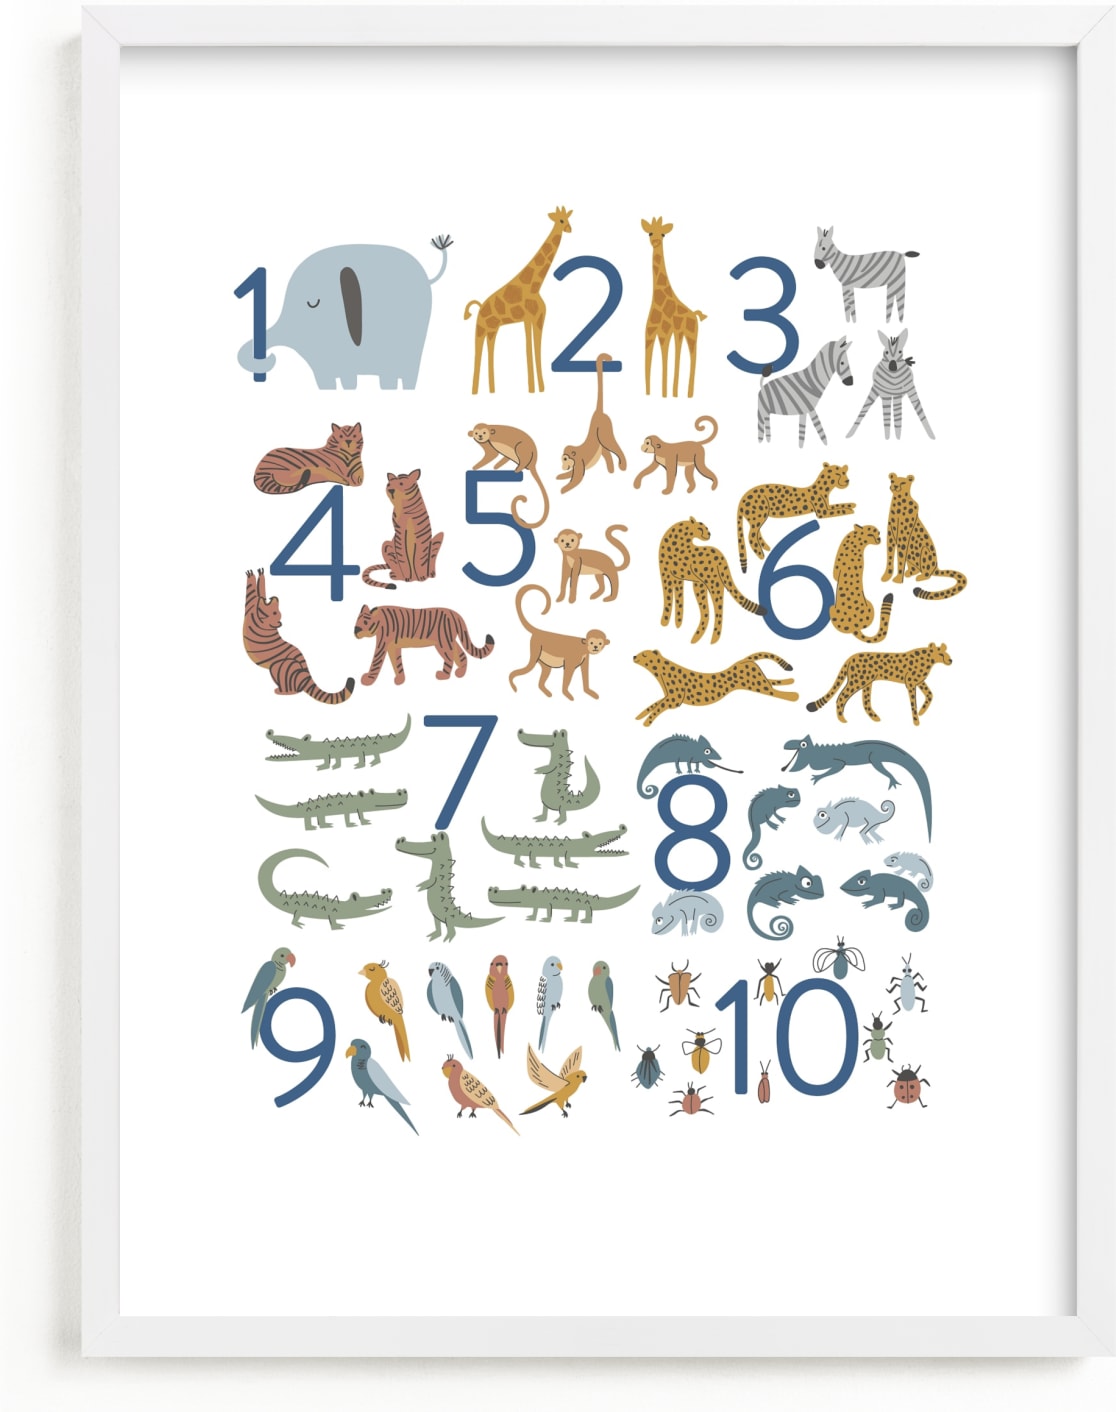 This is a blue kids wall art by Teju Reval called Wild Numbers.